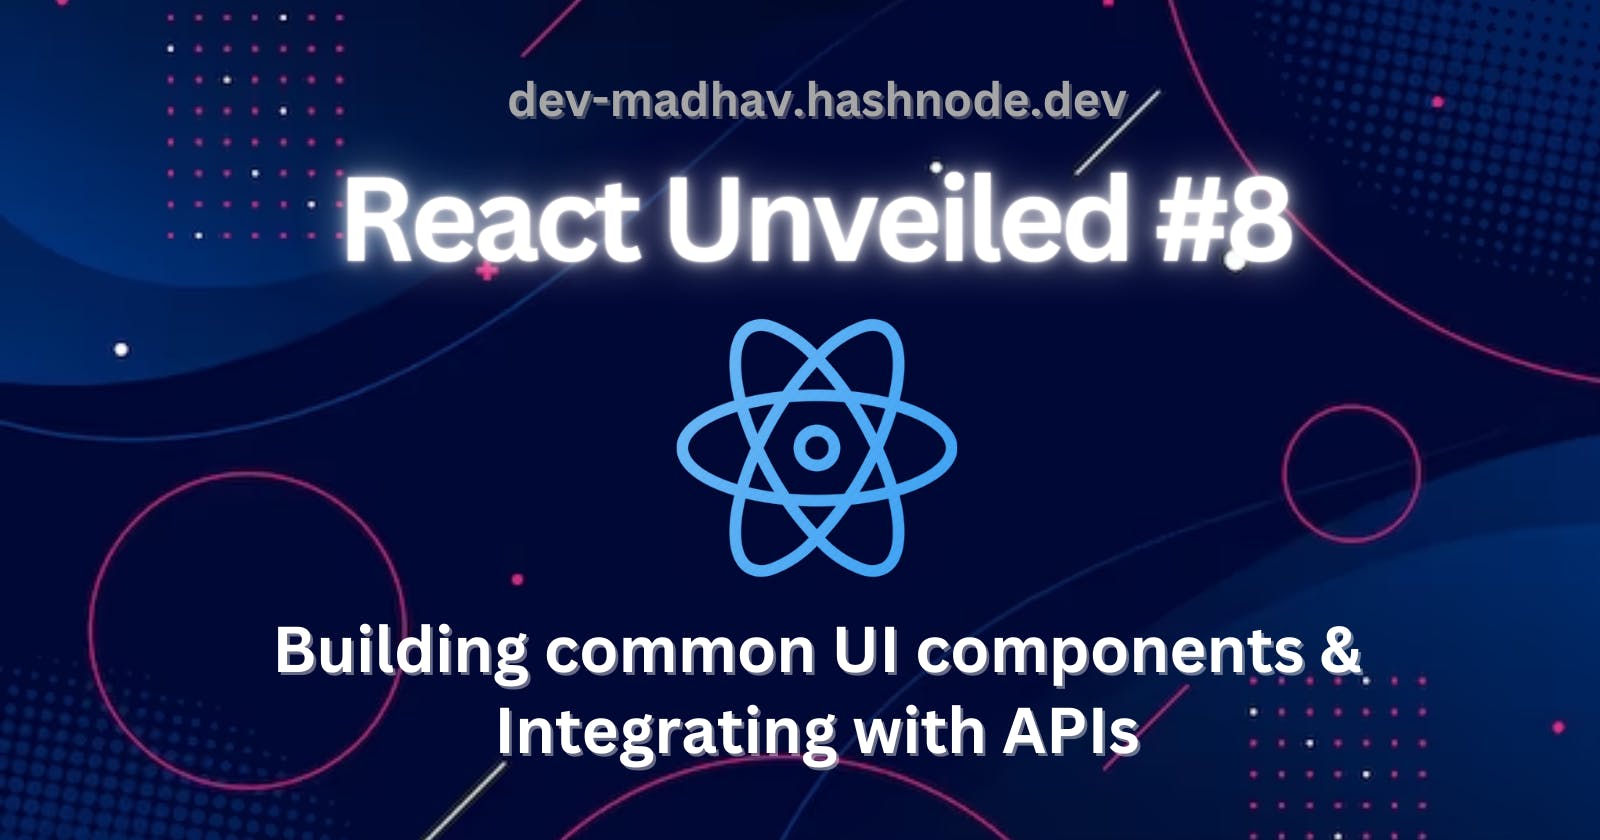 React Unveiled #8 - Building common UI components &
Integrating with APIs